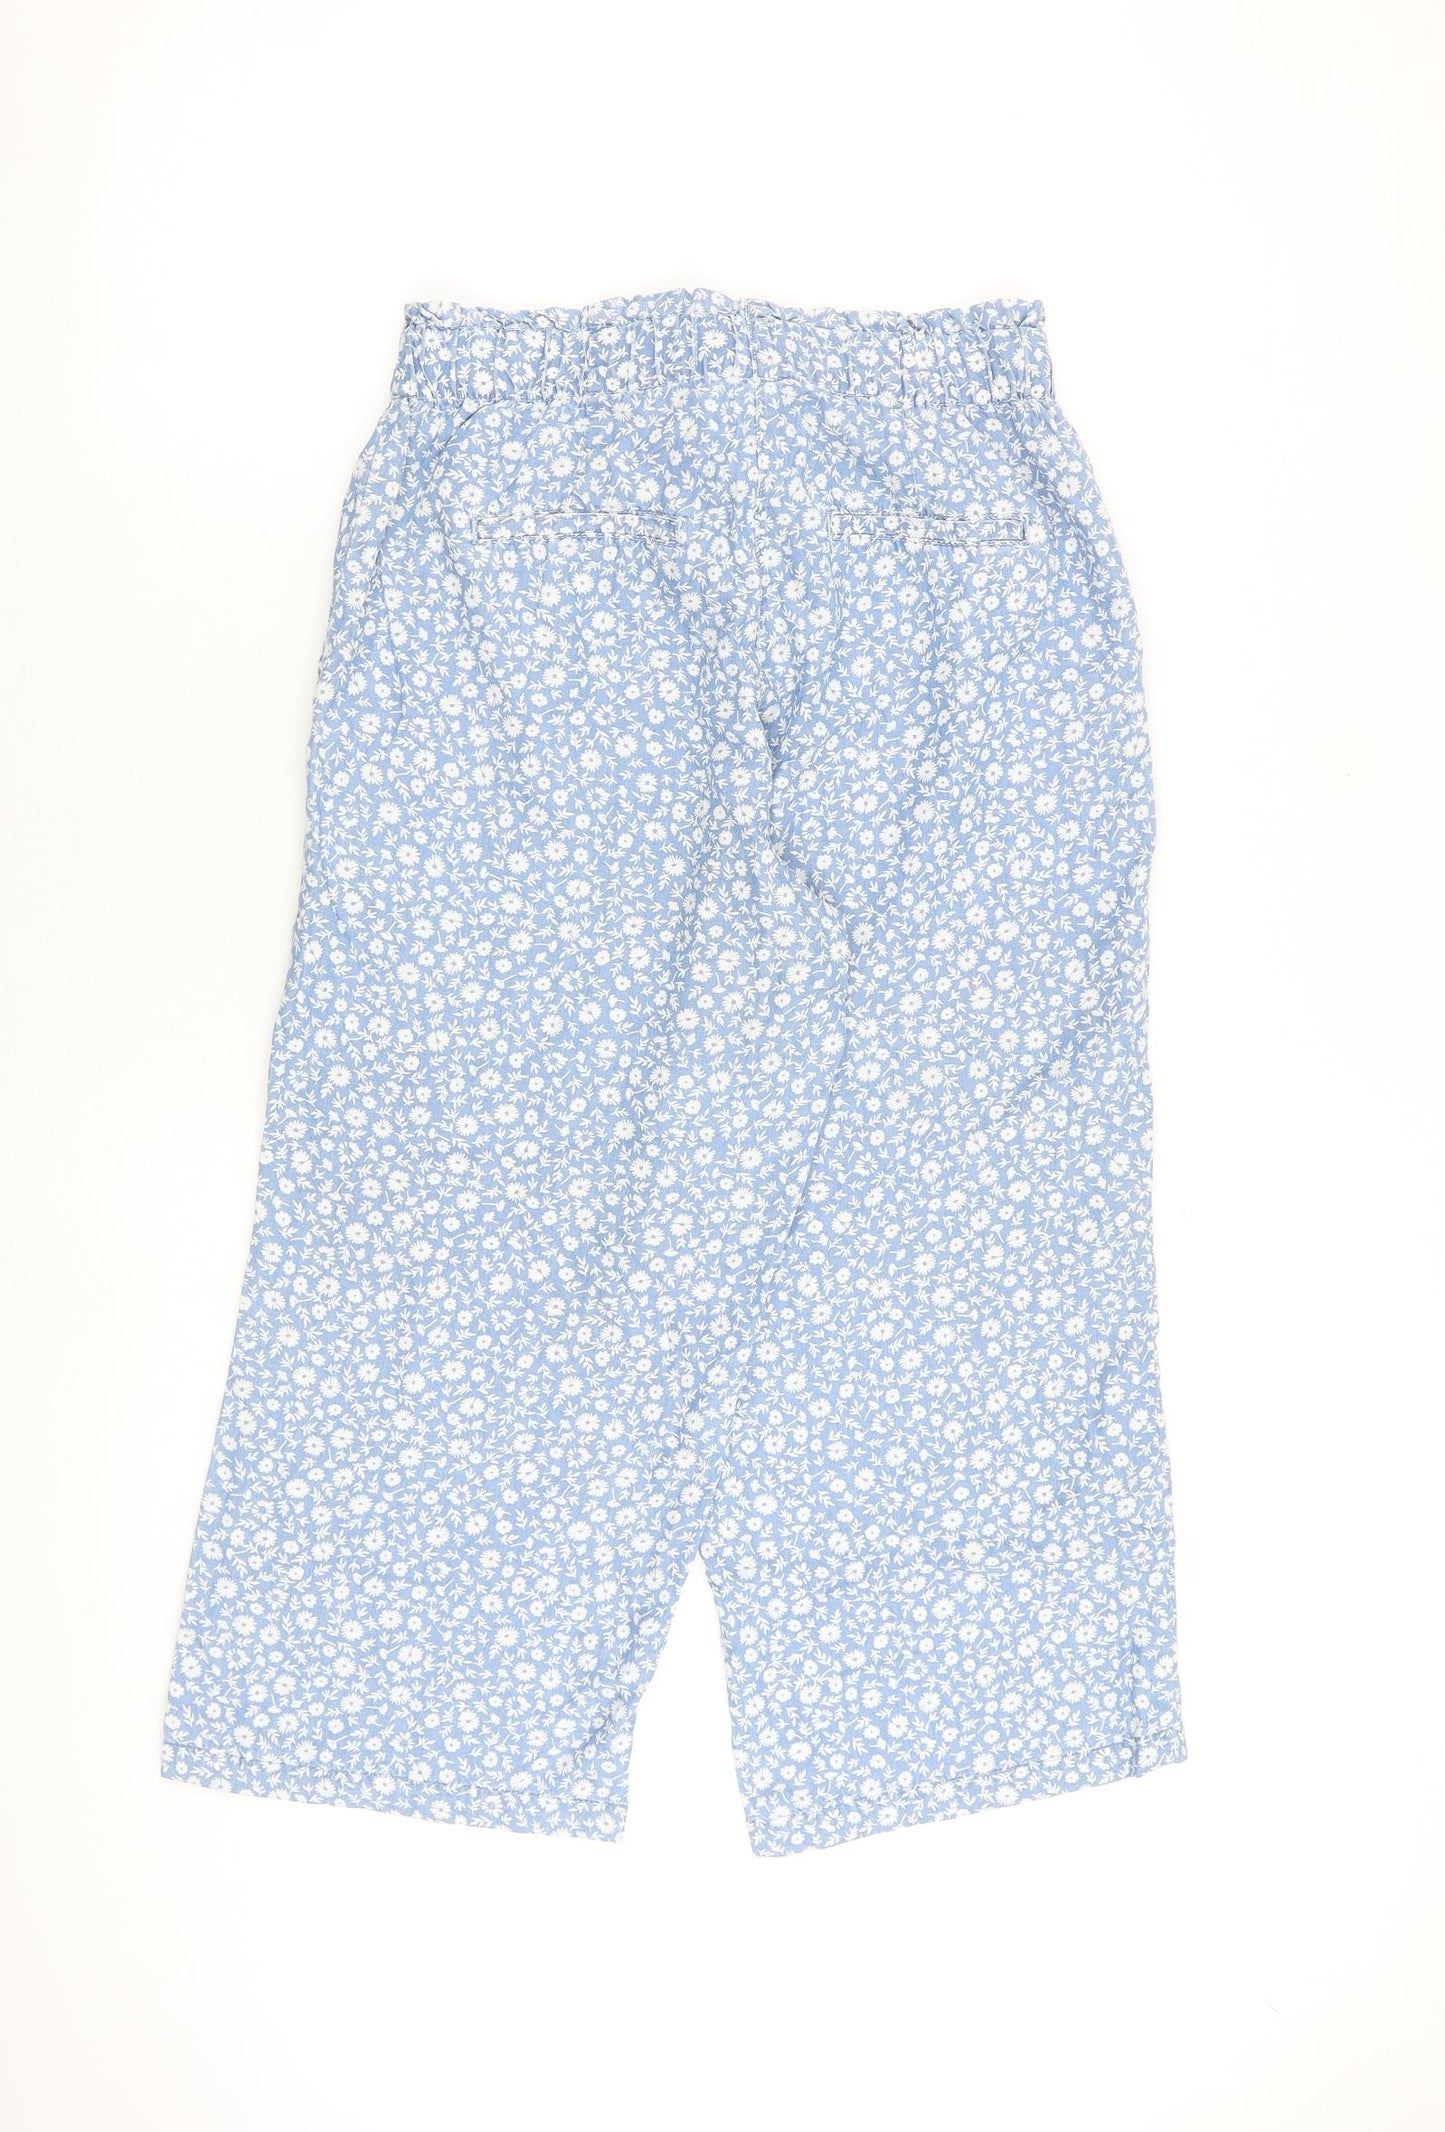 NEXT Womens Blue Floral Lyocell Cropped Trousers Size 10 L23 in Regular Zip